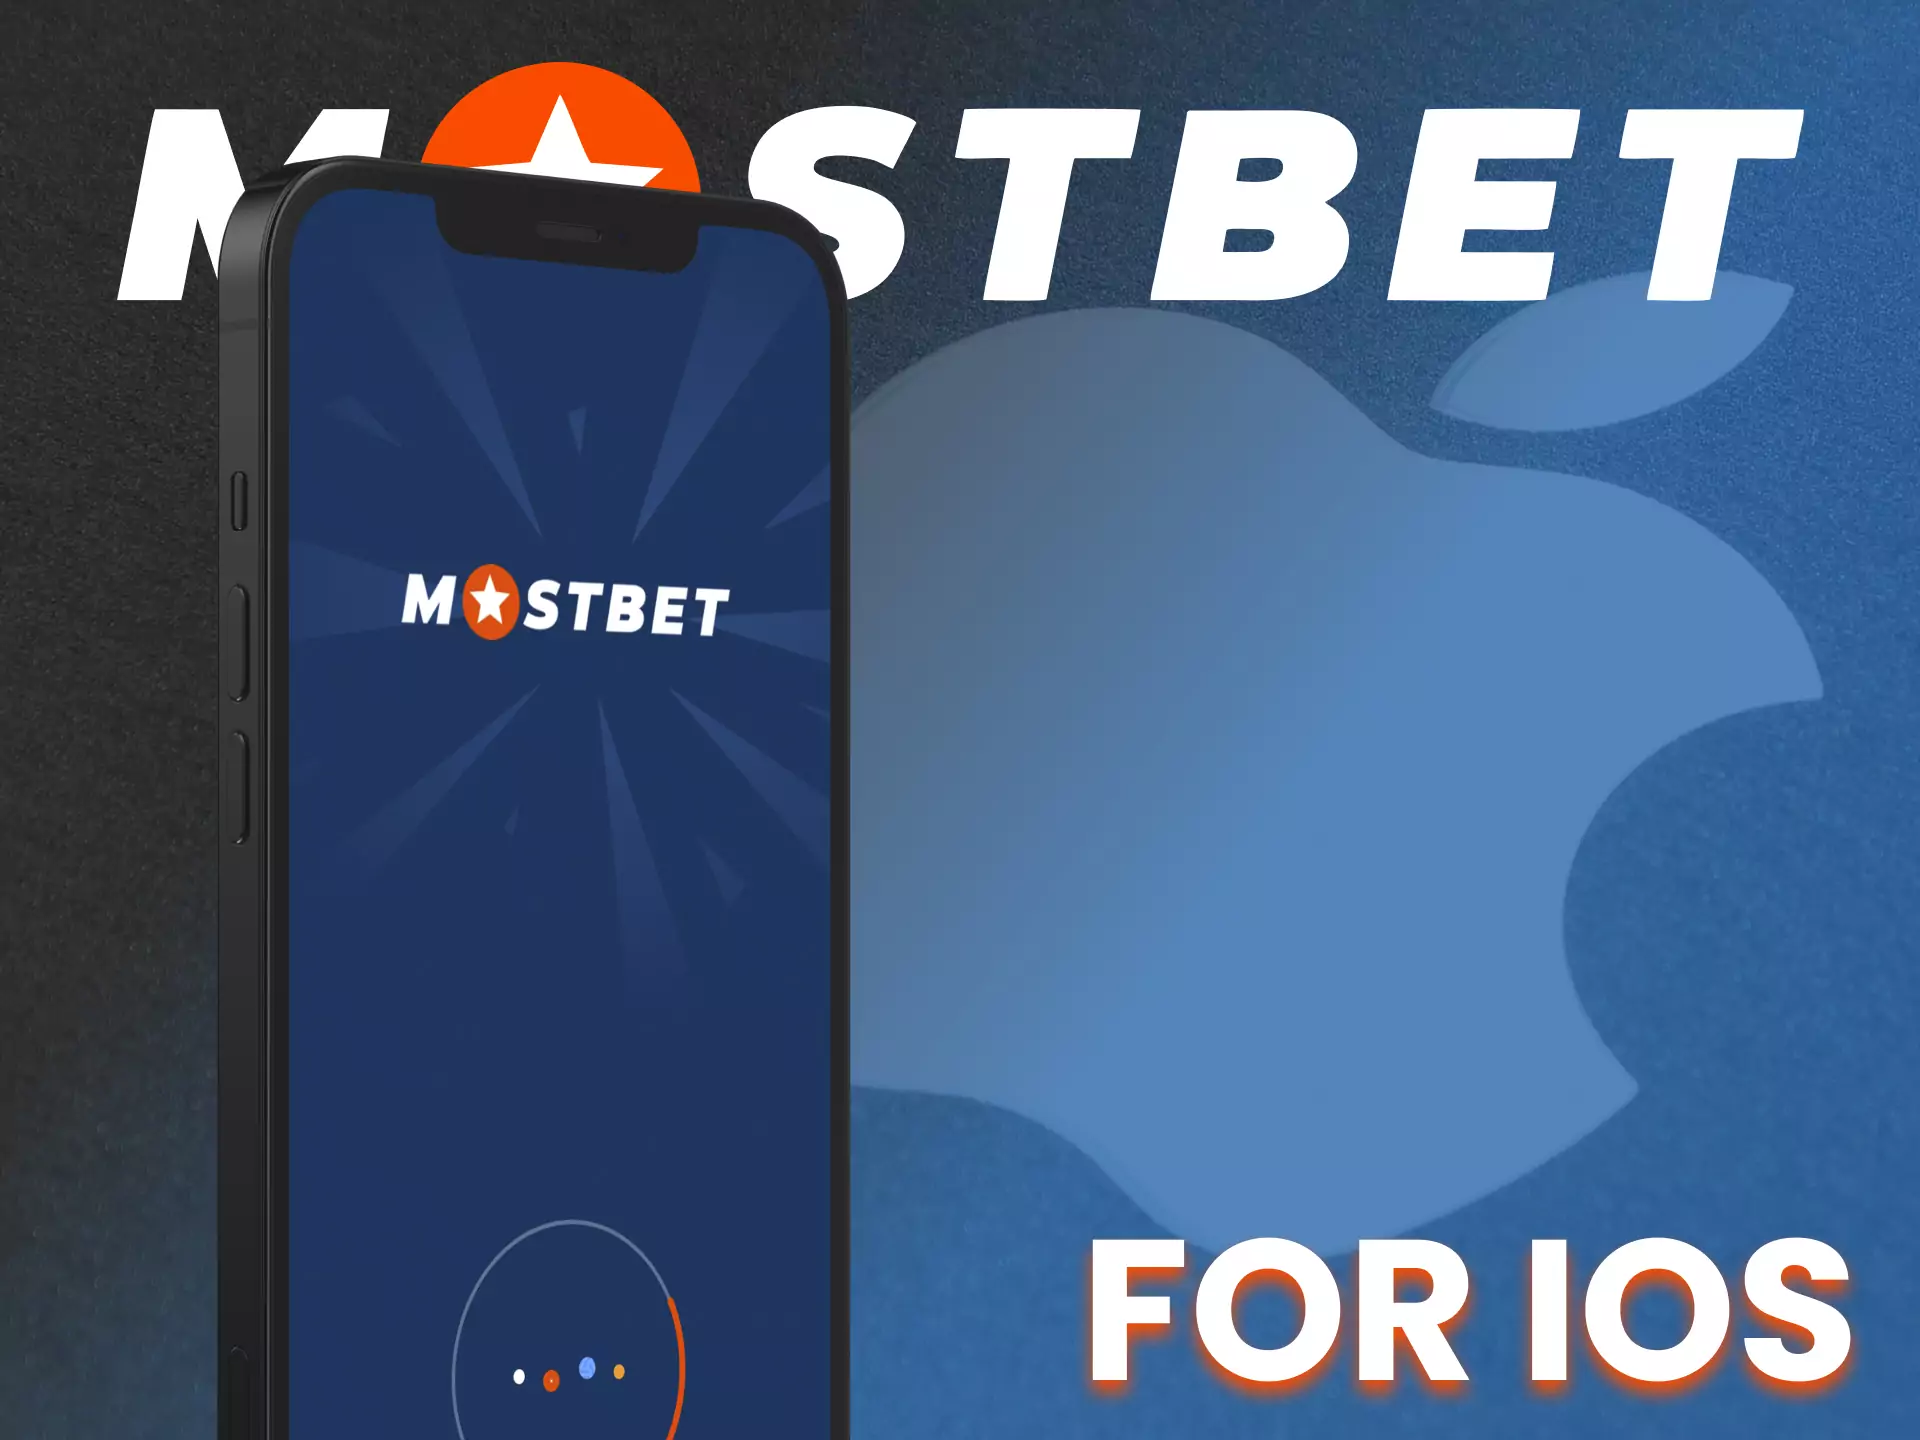 Mostbet has a handy app for iOS phones.